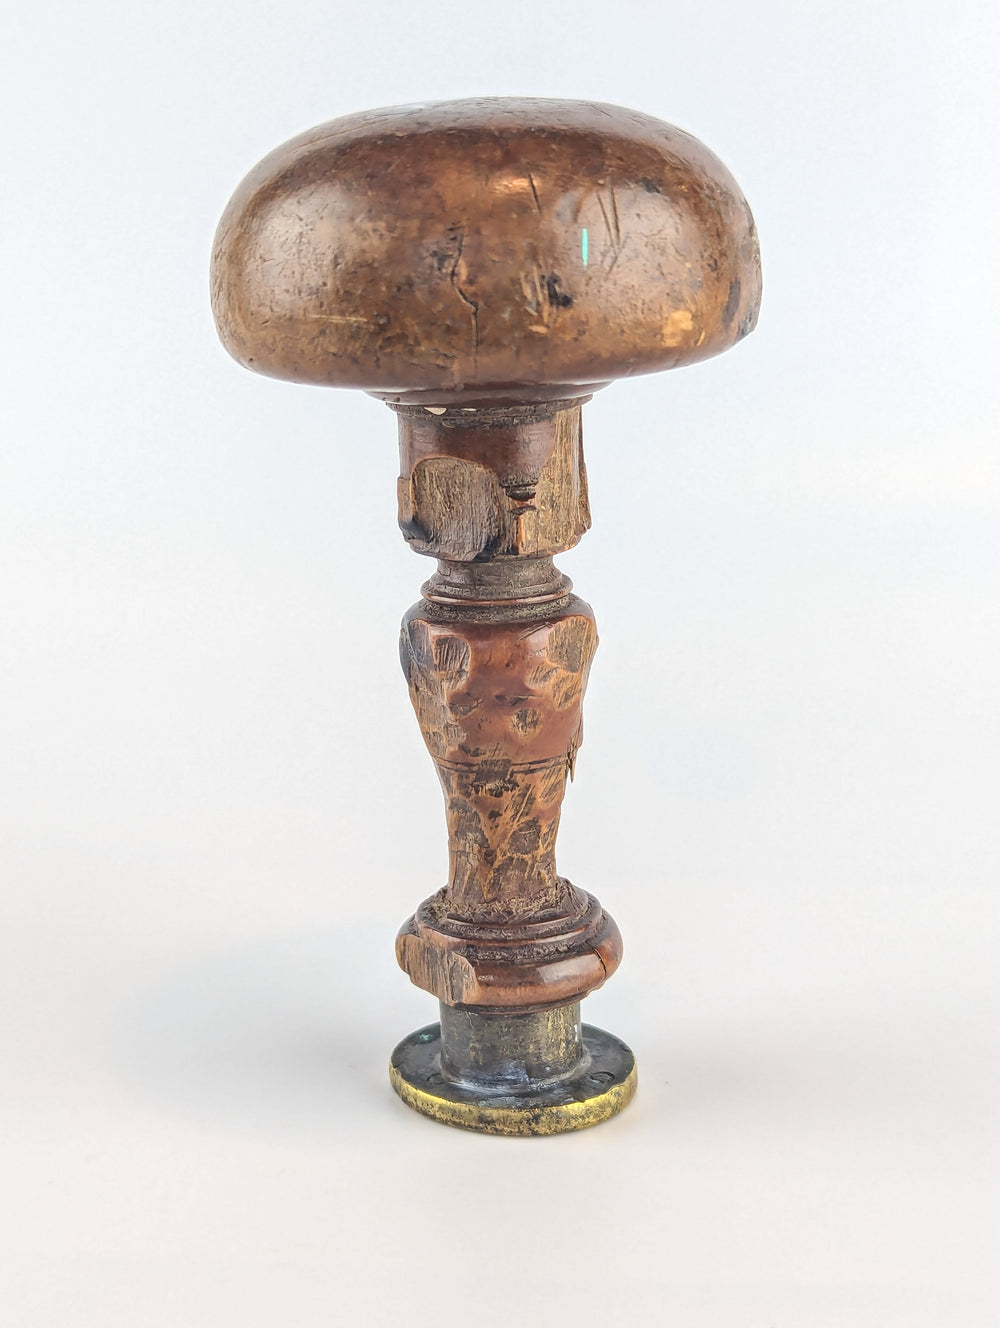 Mushroom Handle Brass Early 18thc French Town Desk Stamp